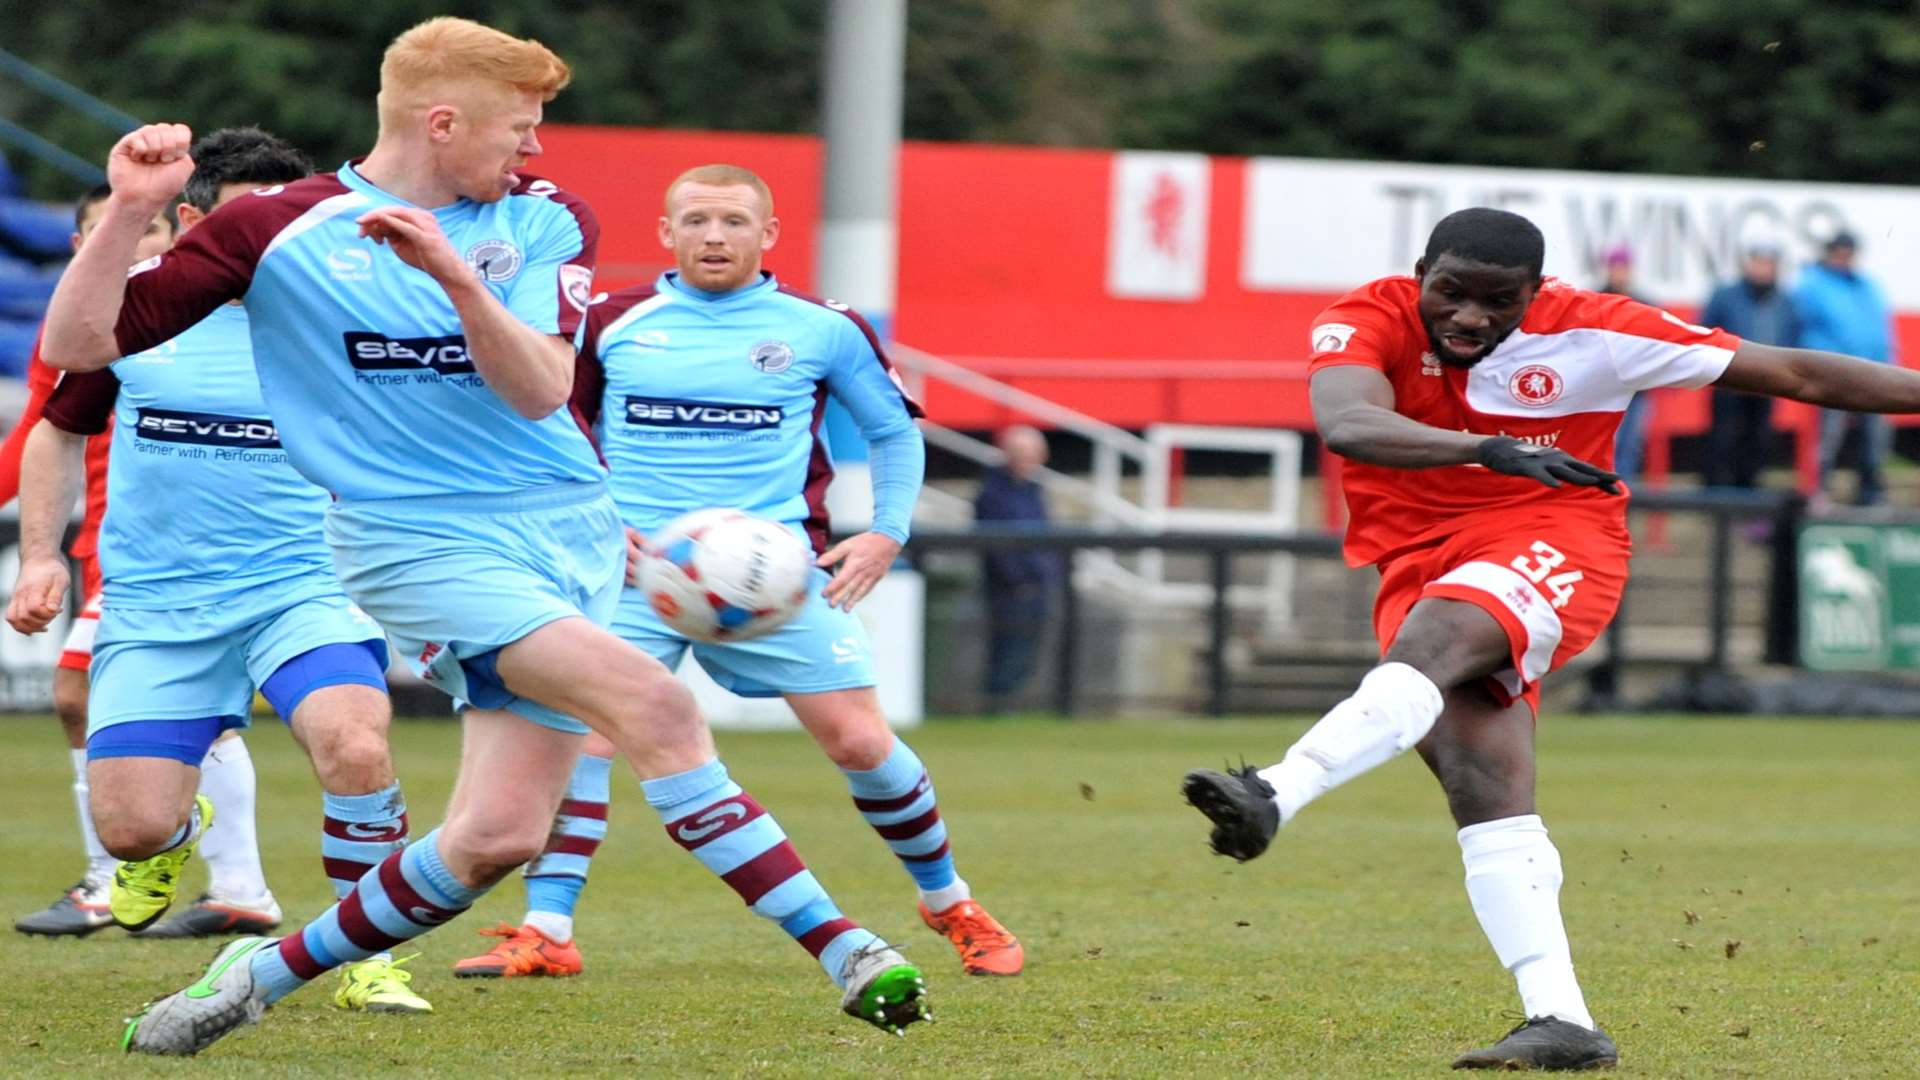 Michael Bakare fires in a shot at goal against Gateshead. Picture: David Brown